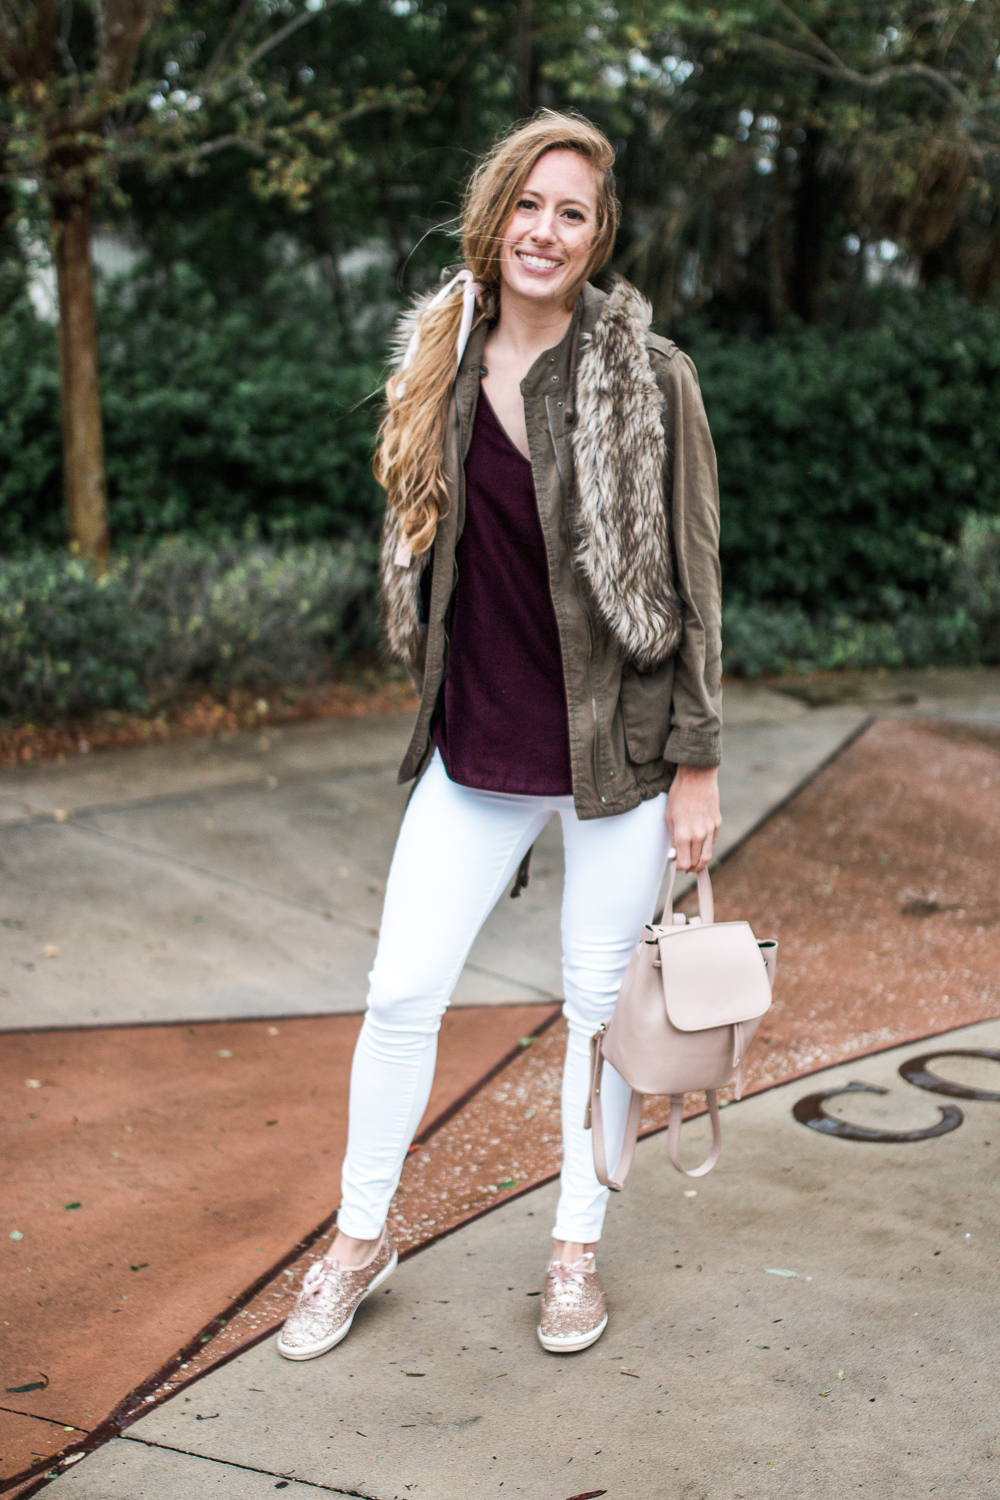 How to Style a Burgundy Velvet Top from Day to Night. Shop over 50 velvet pieces. 